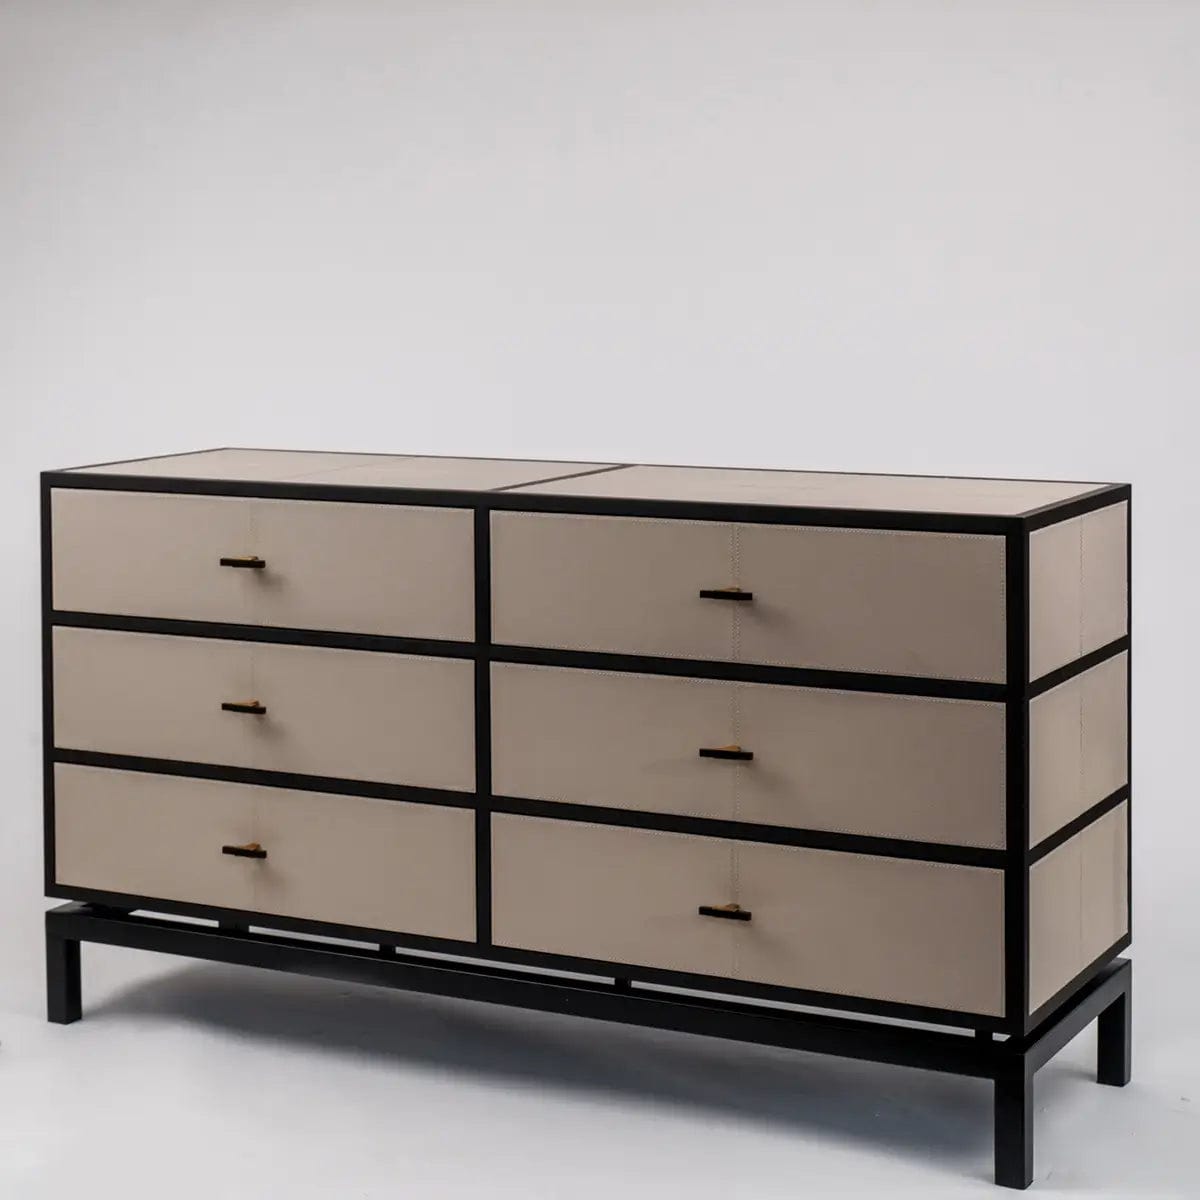 Eccotrading Design London Sleeping Bertie 6 Drawer Chest Pumice Leather House of Isabella UK